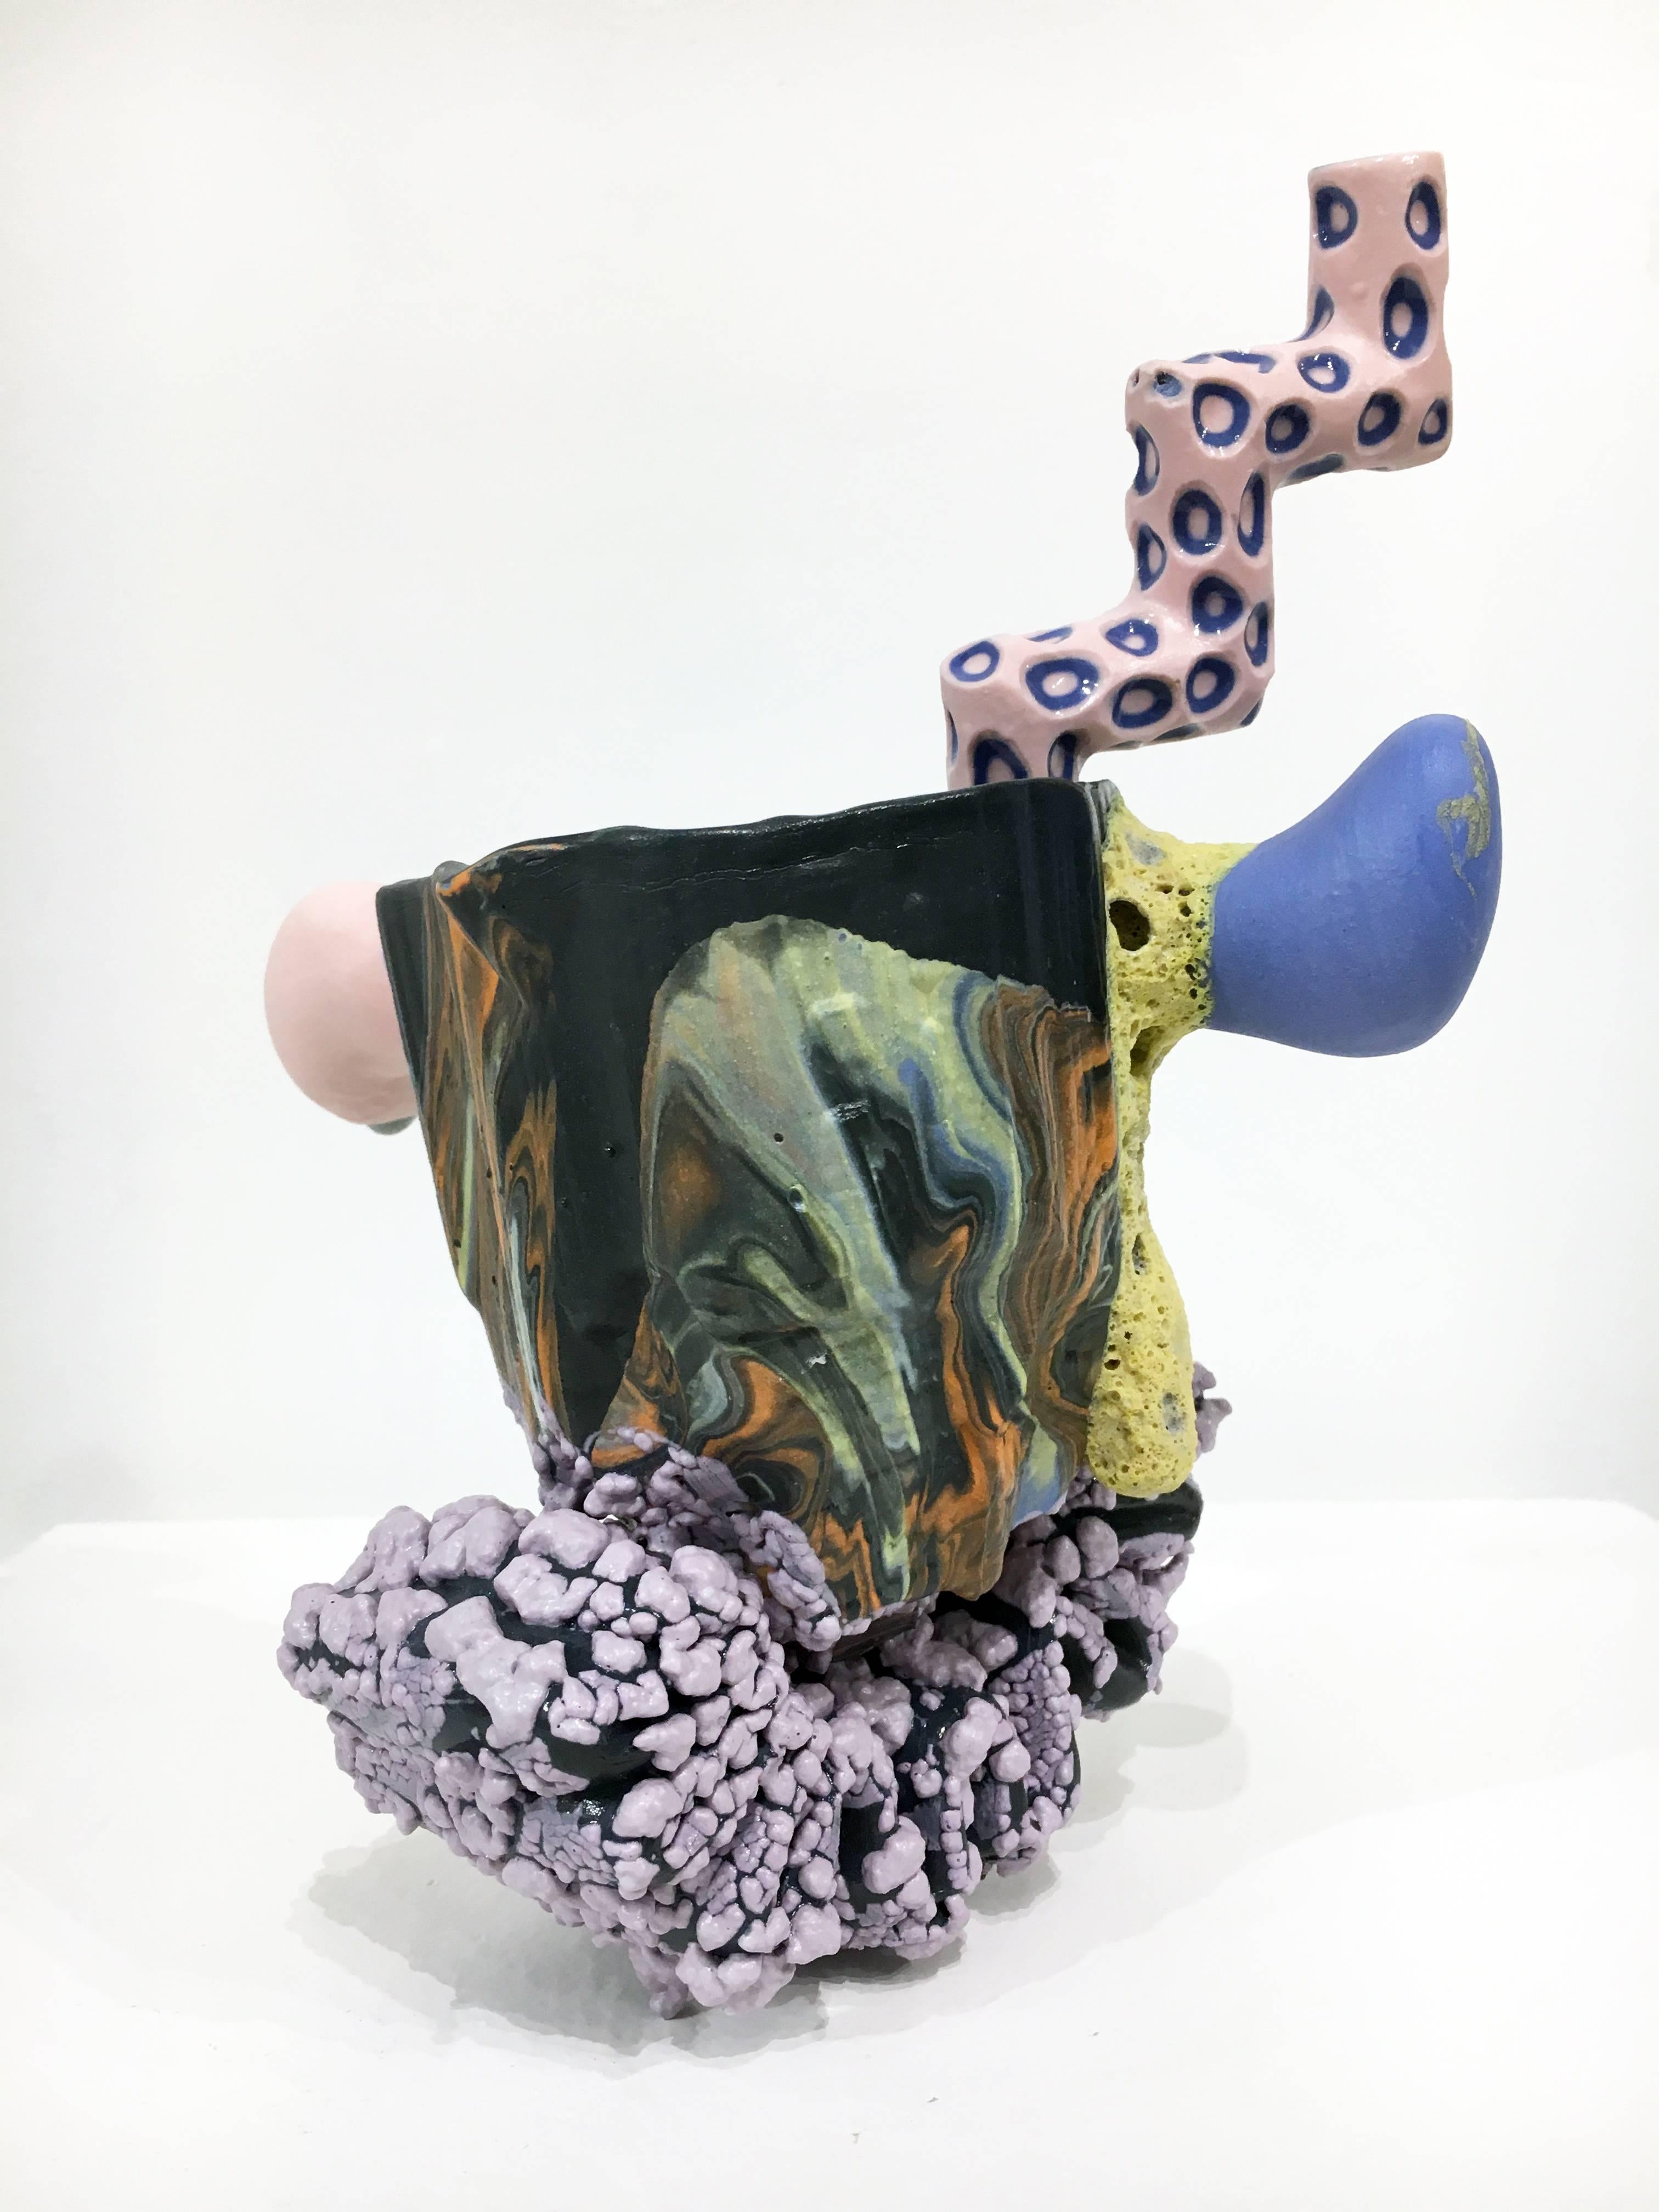 Abstracted Ceramic Cup and Straw Set with Colorful Glaze - Sculpture by Joey Watson